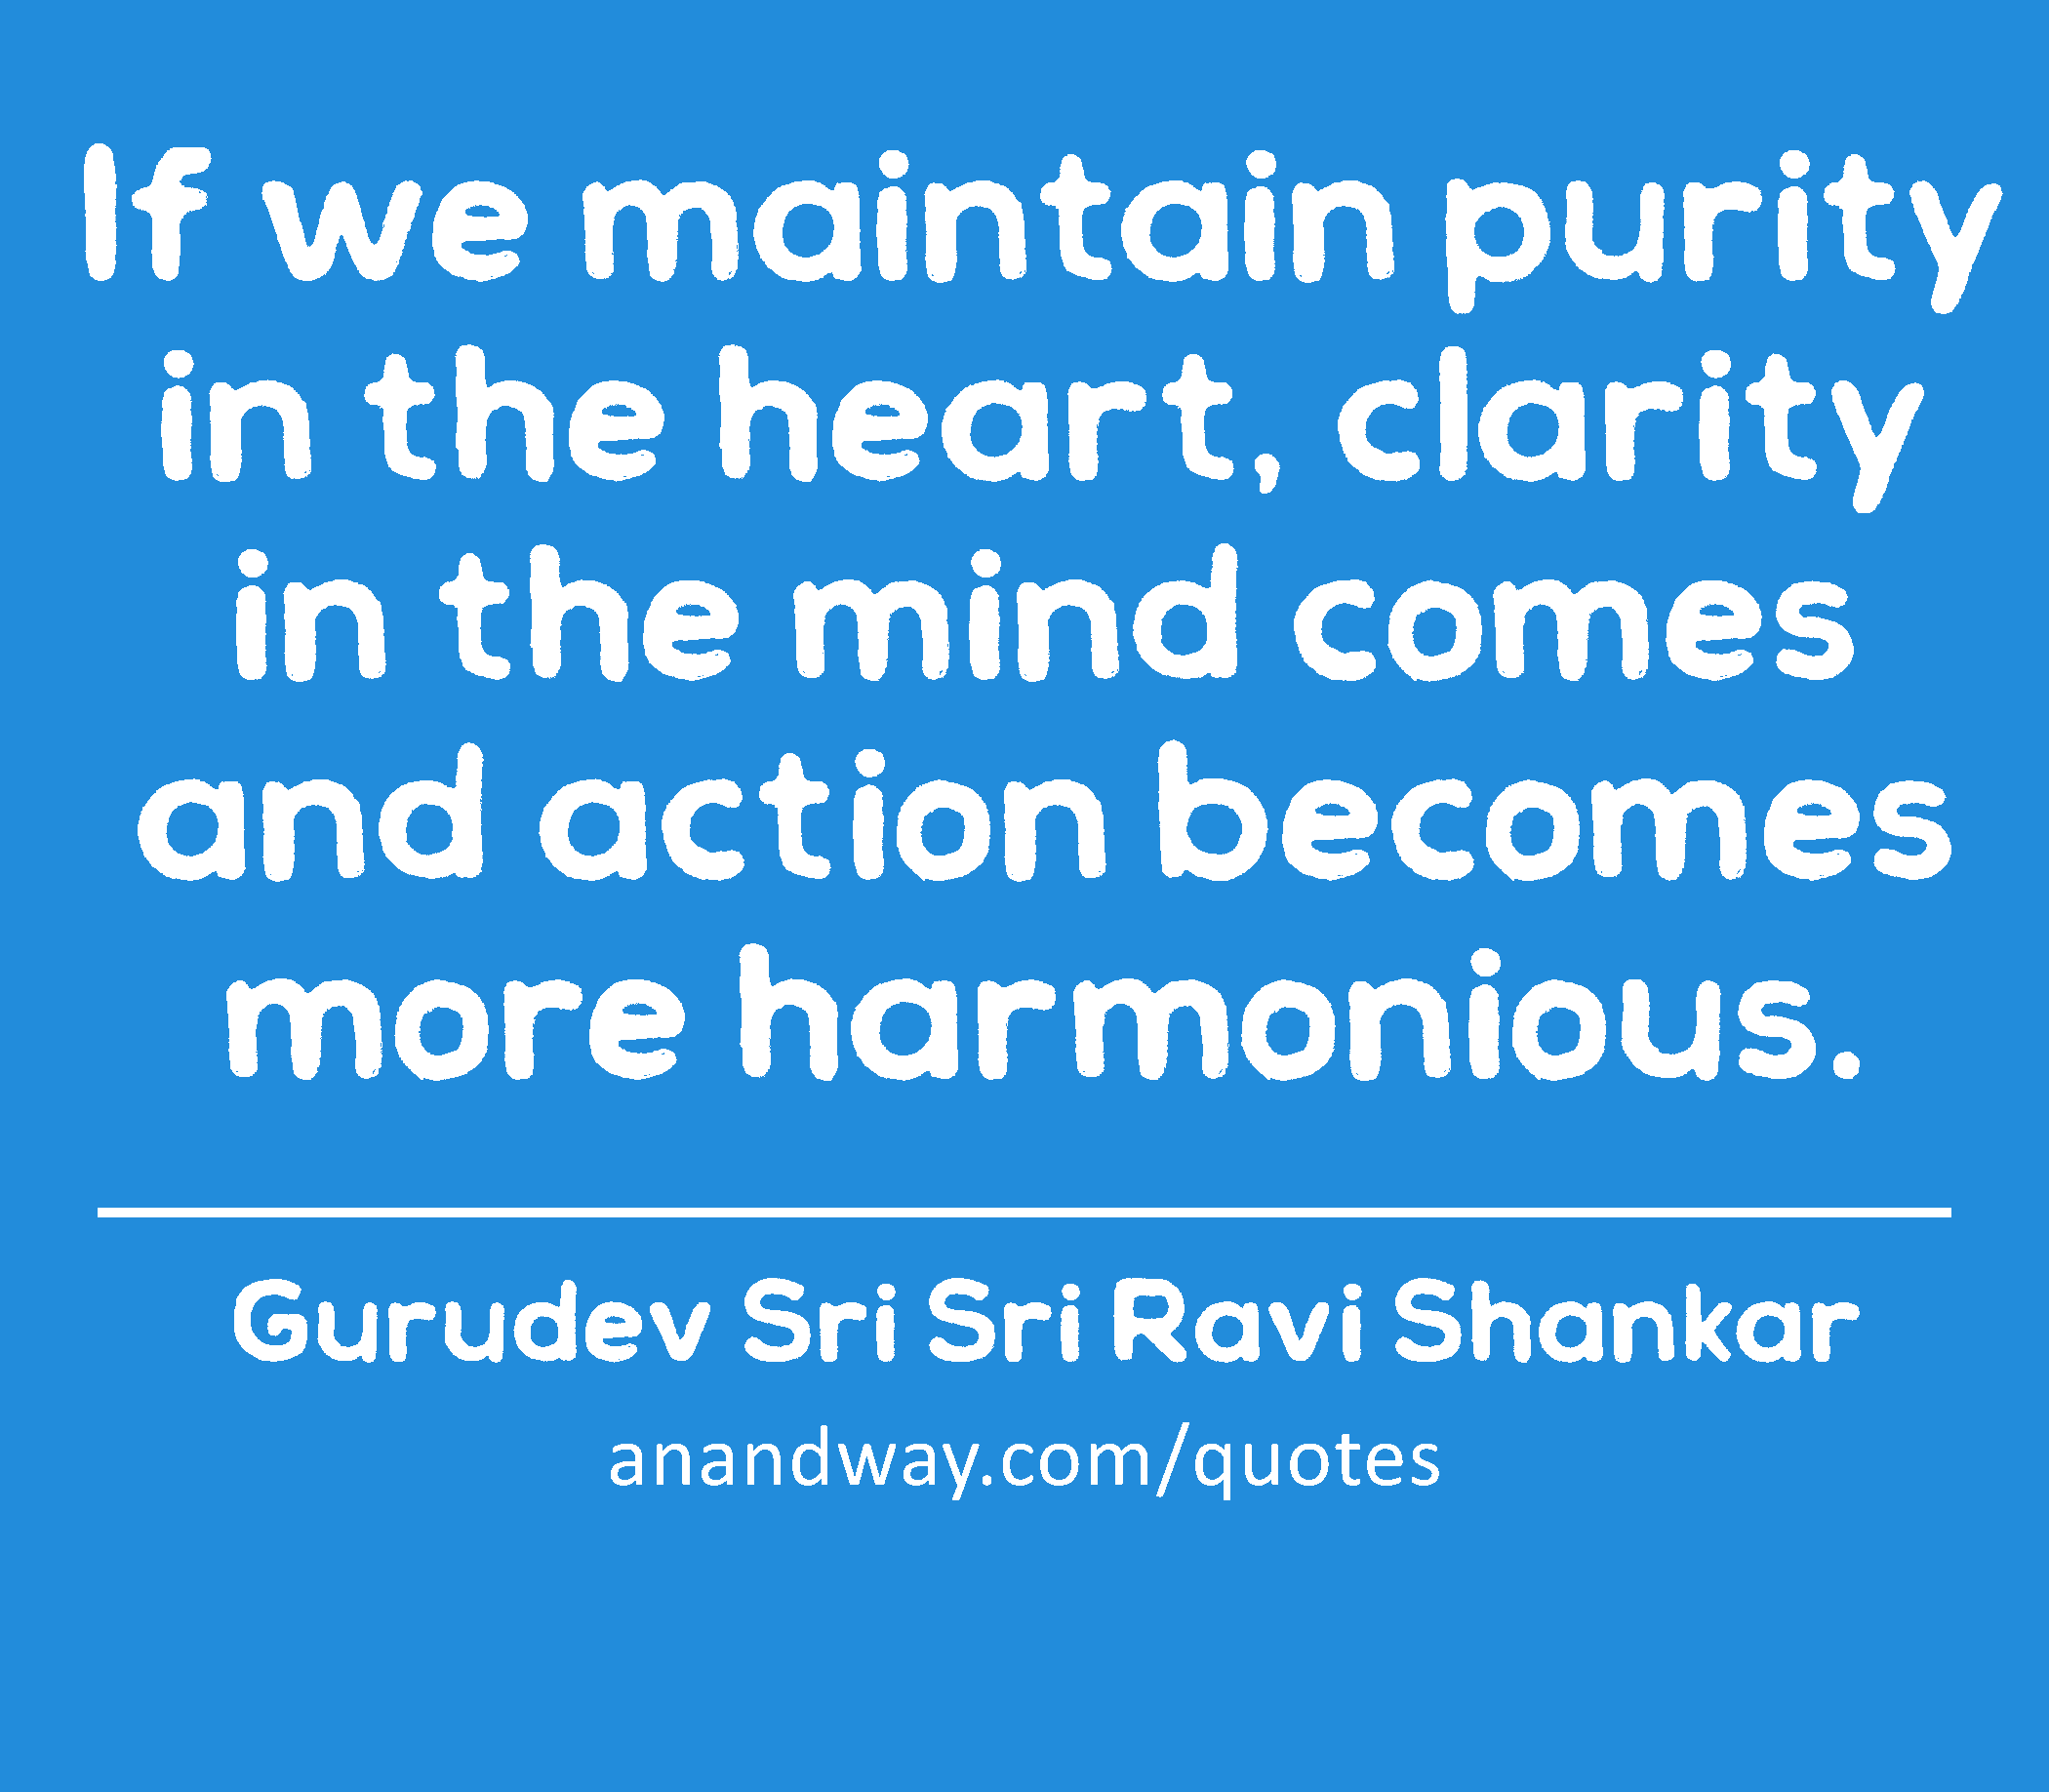 If we maintain purity in the heart, clarity in the mind comes and action becomes more harmonious. 
 -Gurudev Sri Sri Ravi Shankar